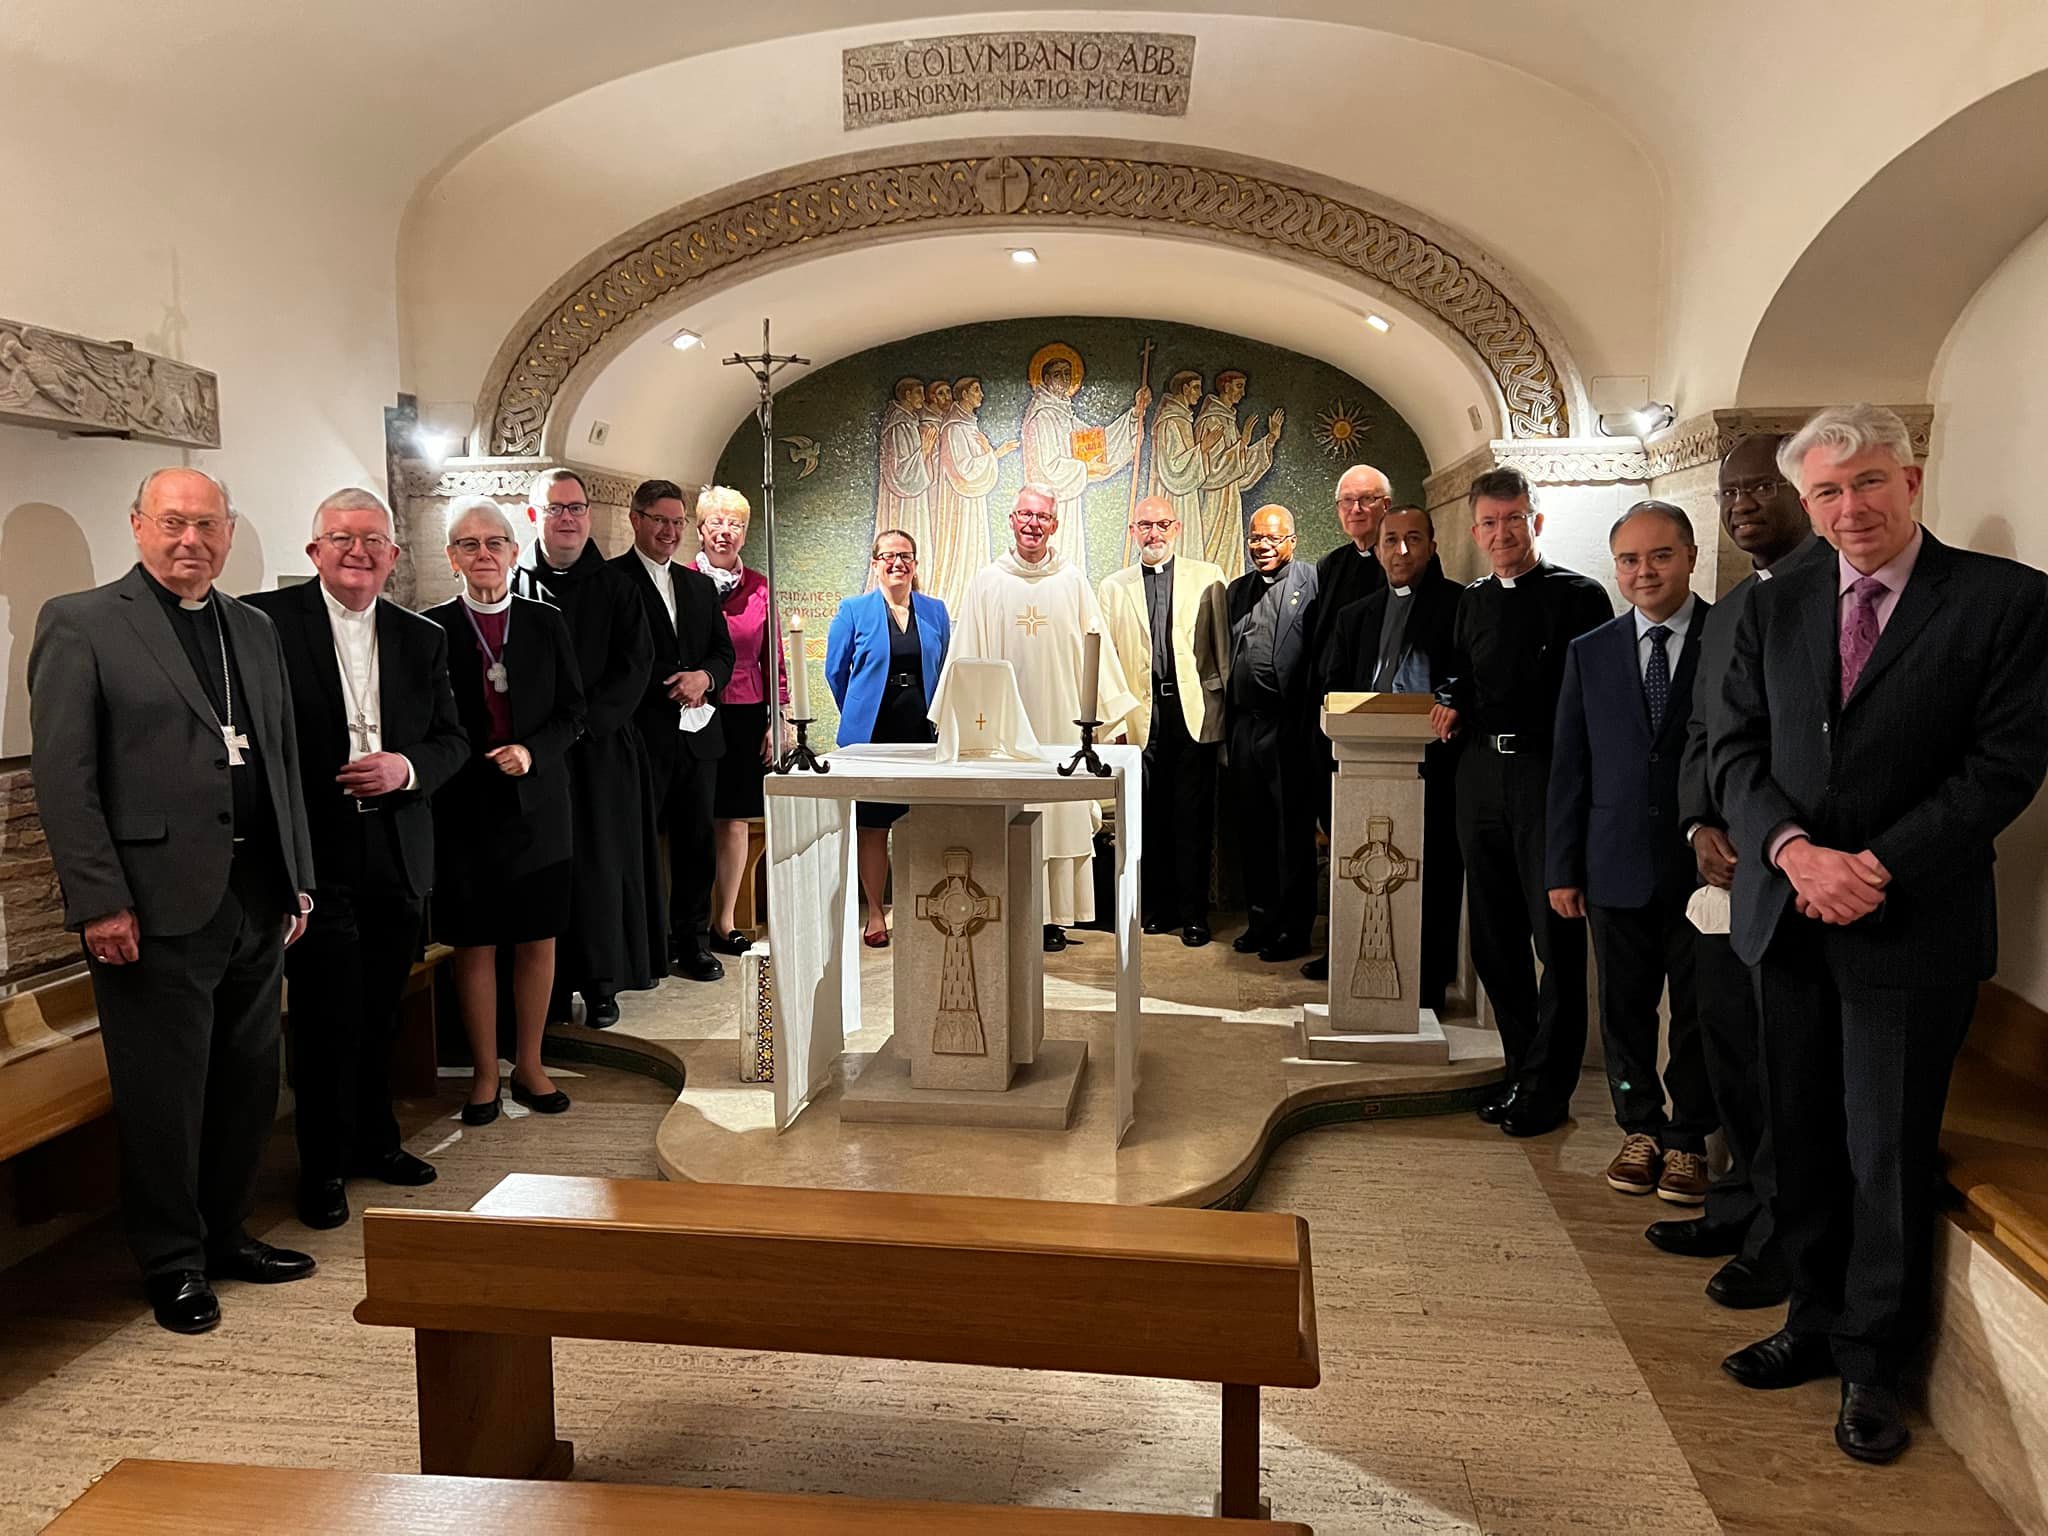 ARCIC-III members celebrated the Eucharist together in the Irish Chapel in the Crypt of St. Peter's Basilica before their visit with Pope Francis